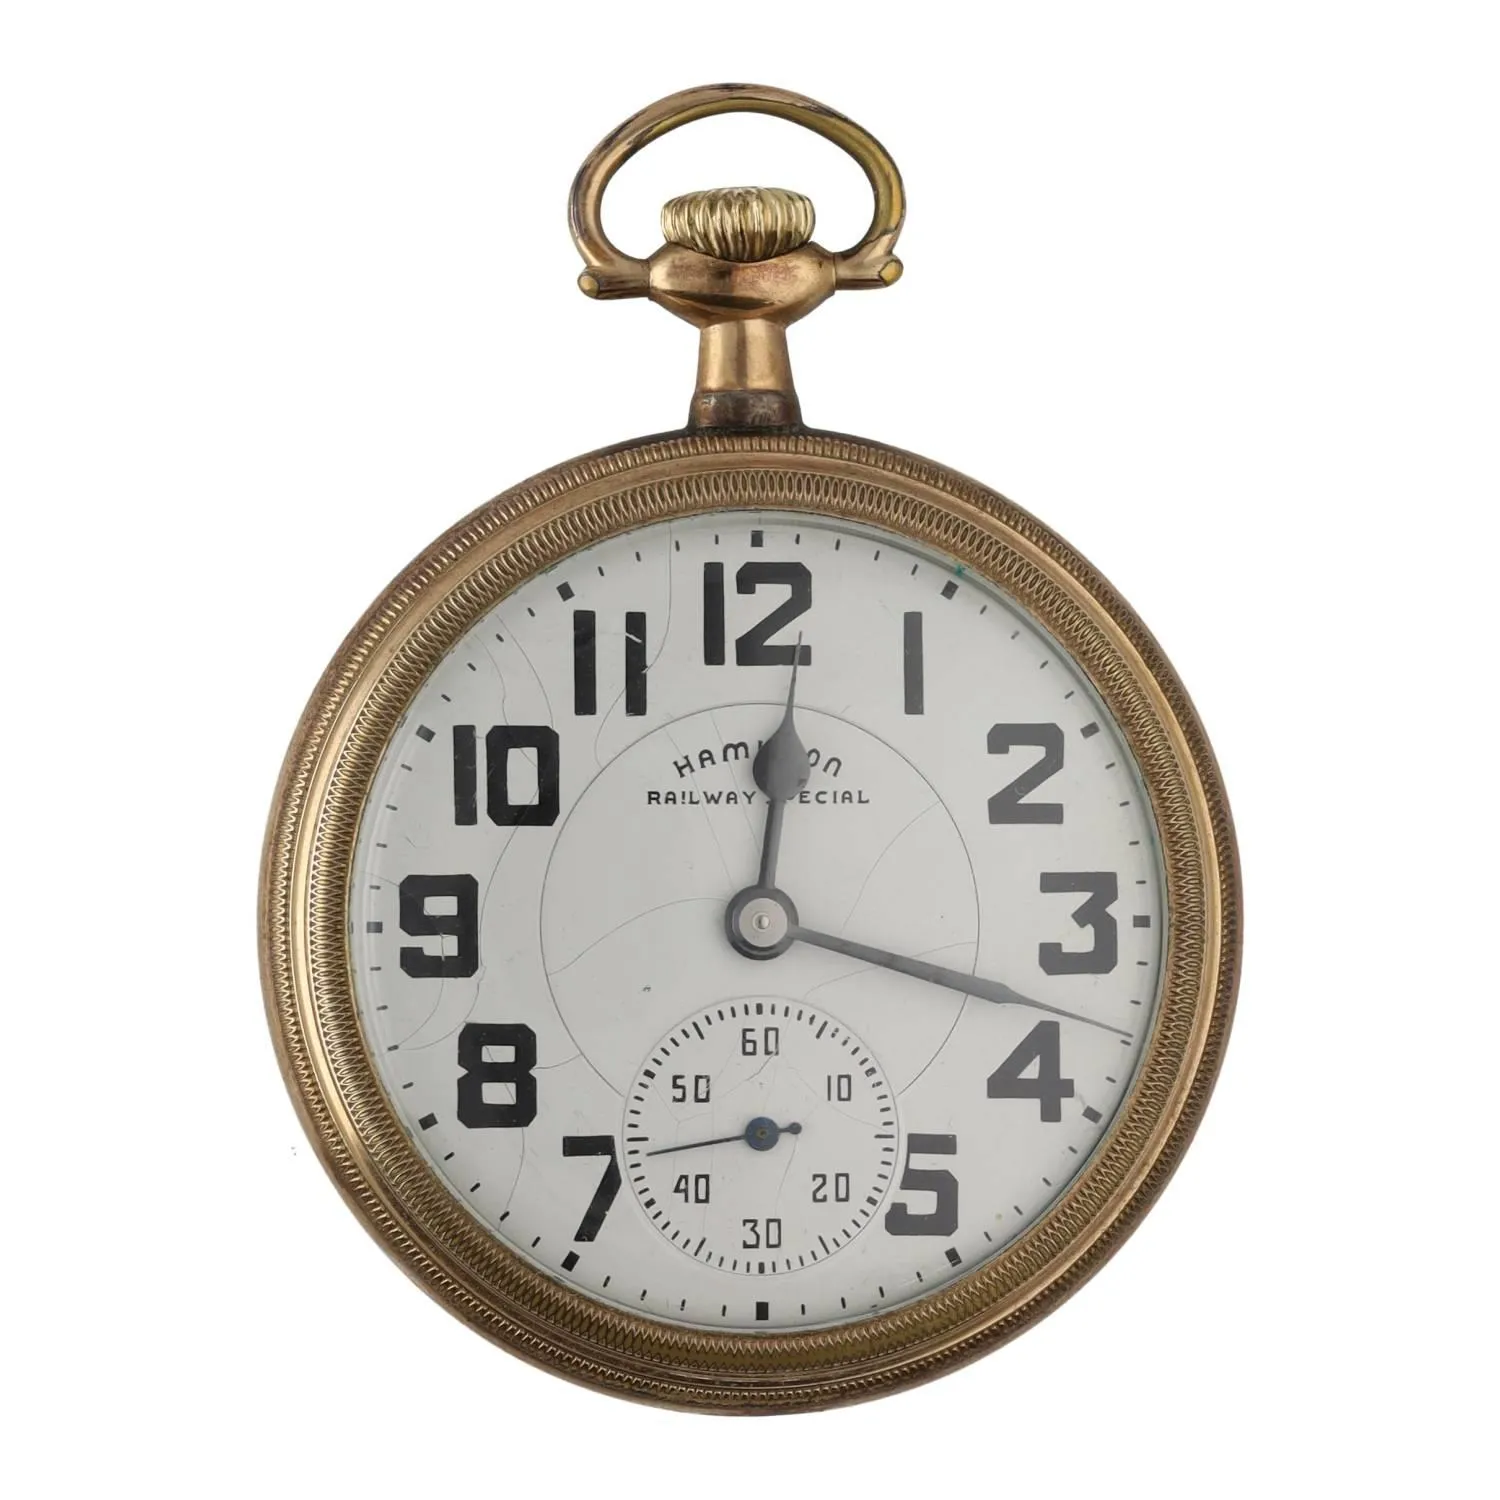 Hamilton Railway Special 51mm Gold-plated 1